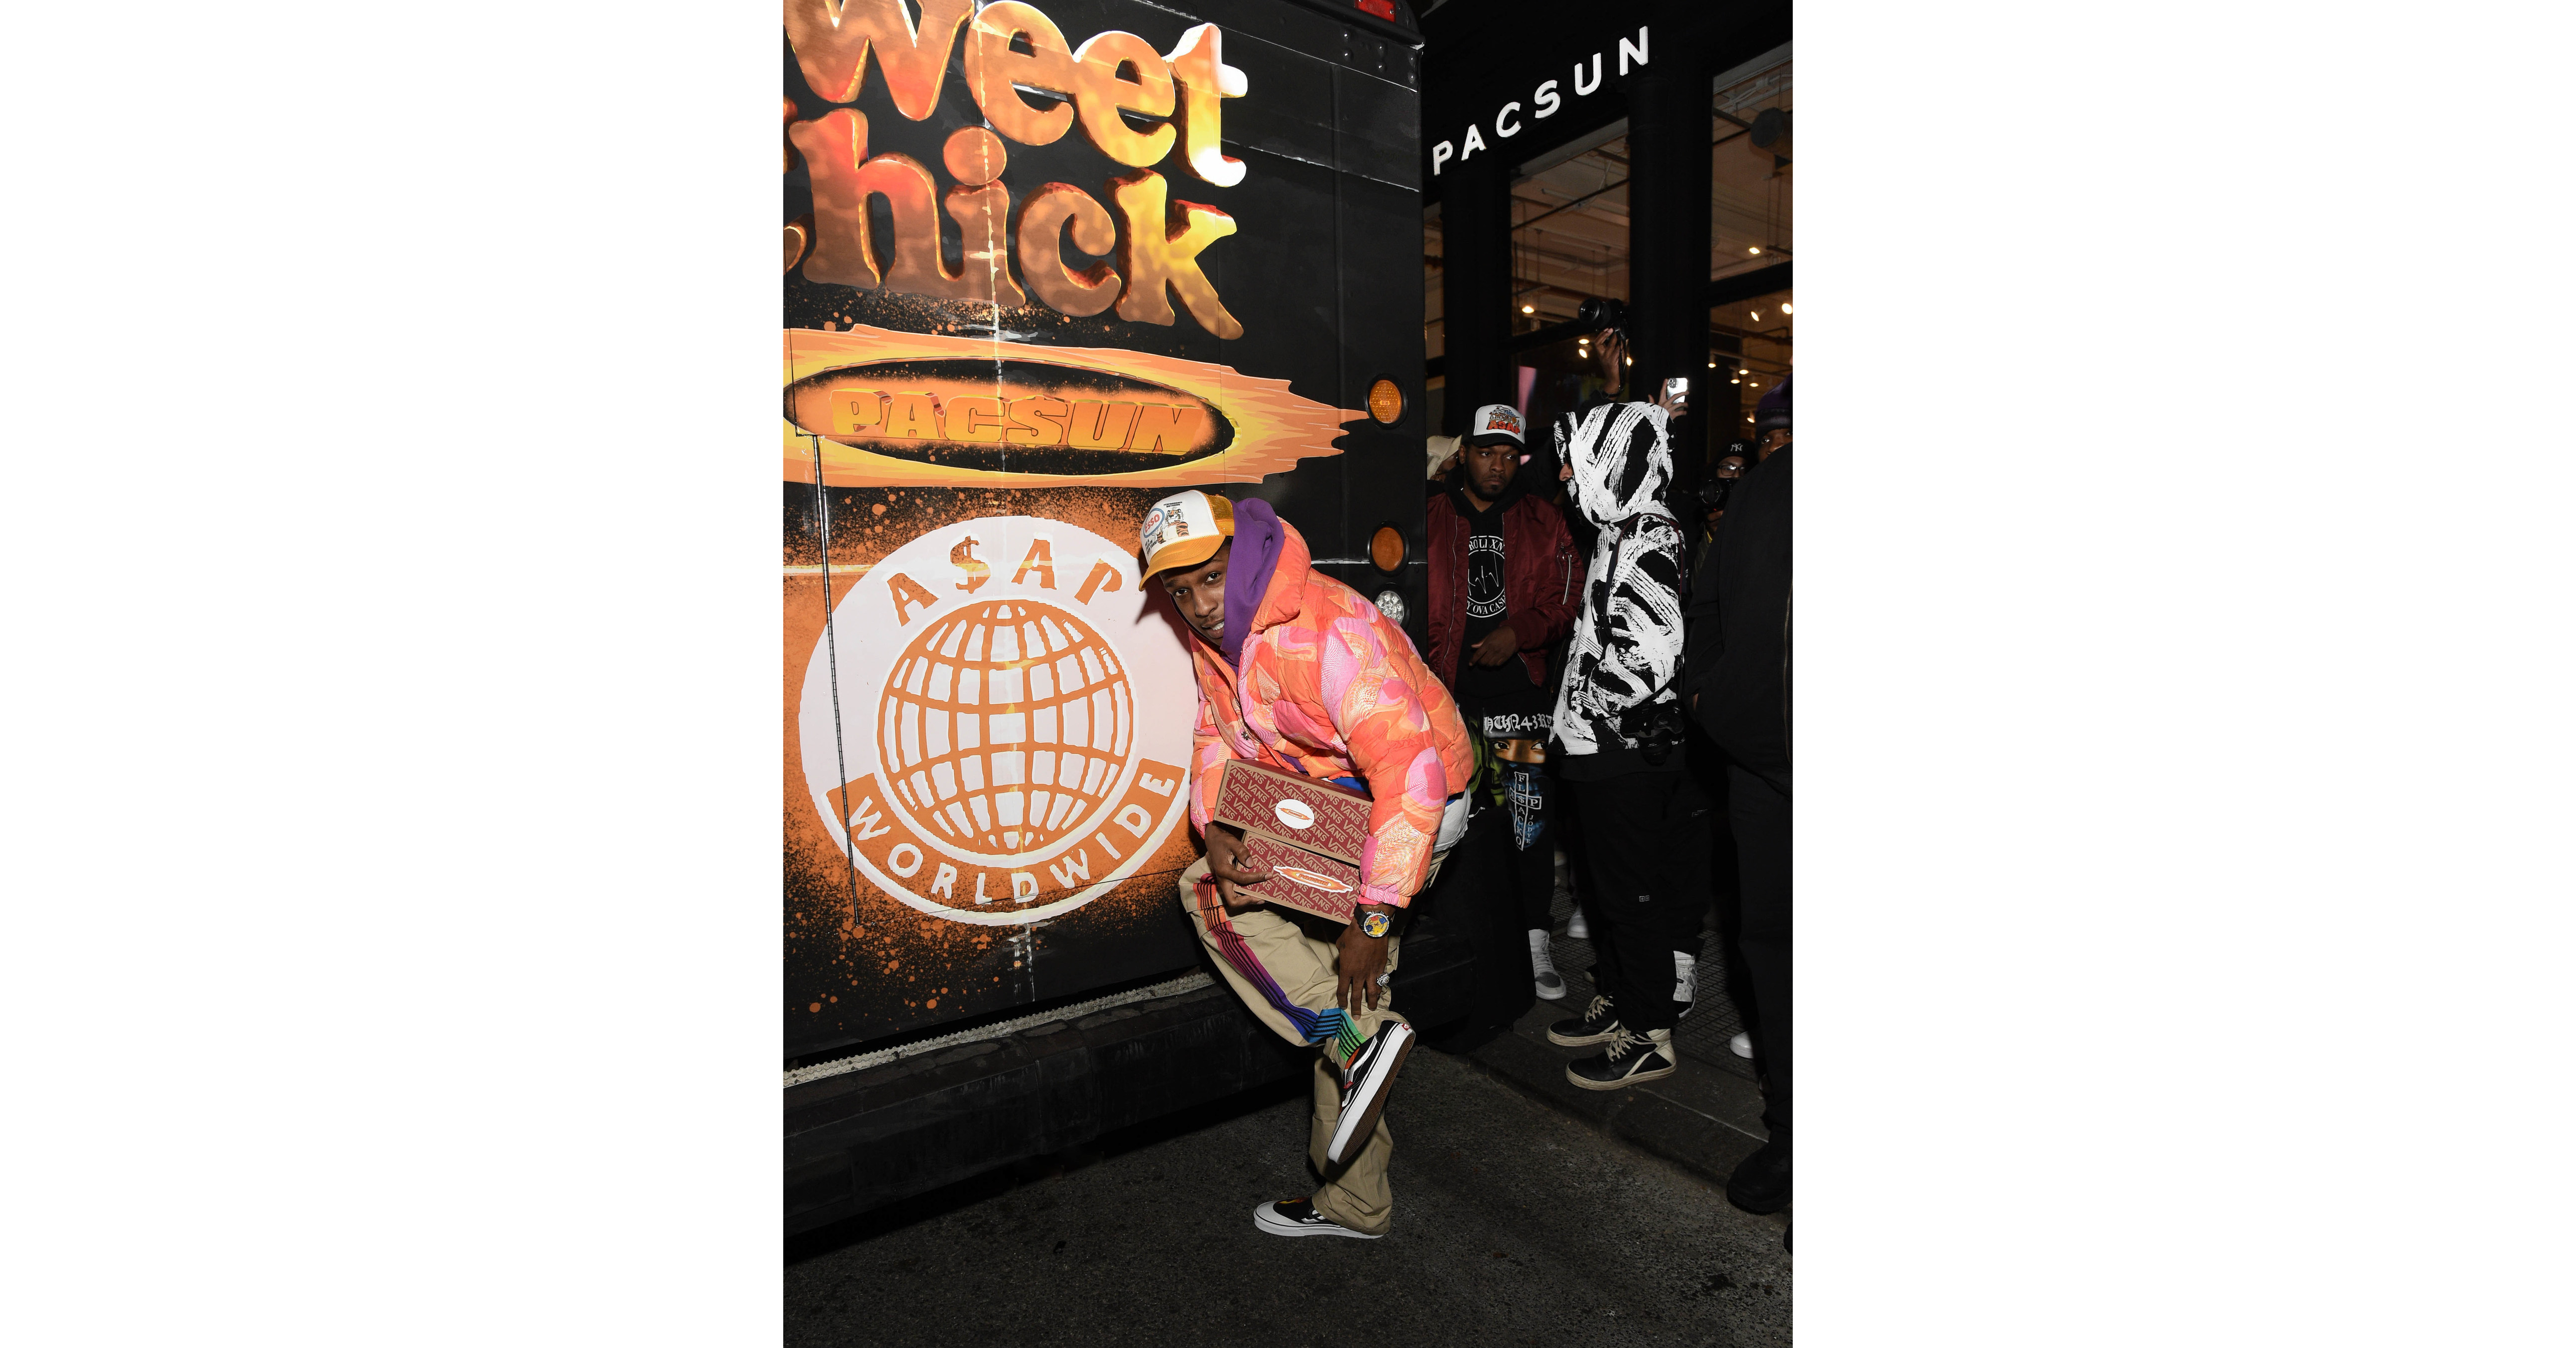 A$AP Rocky Releases New Vans Collaboration With PacSun